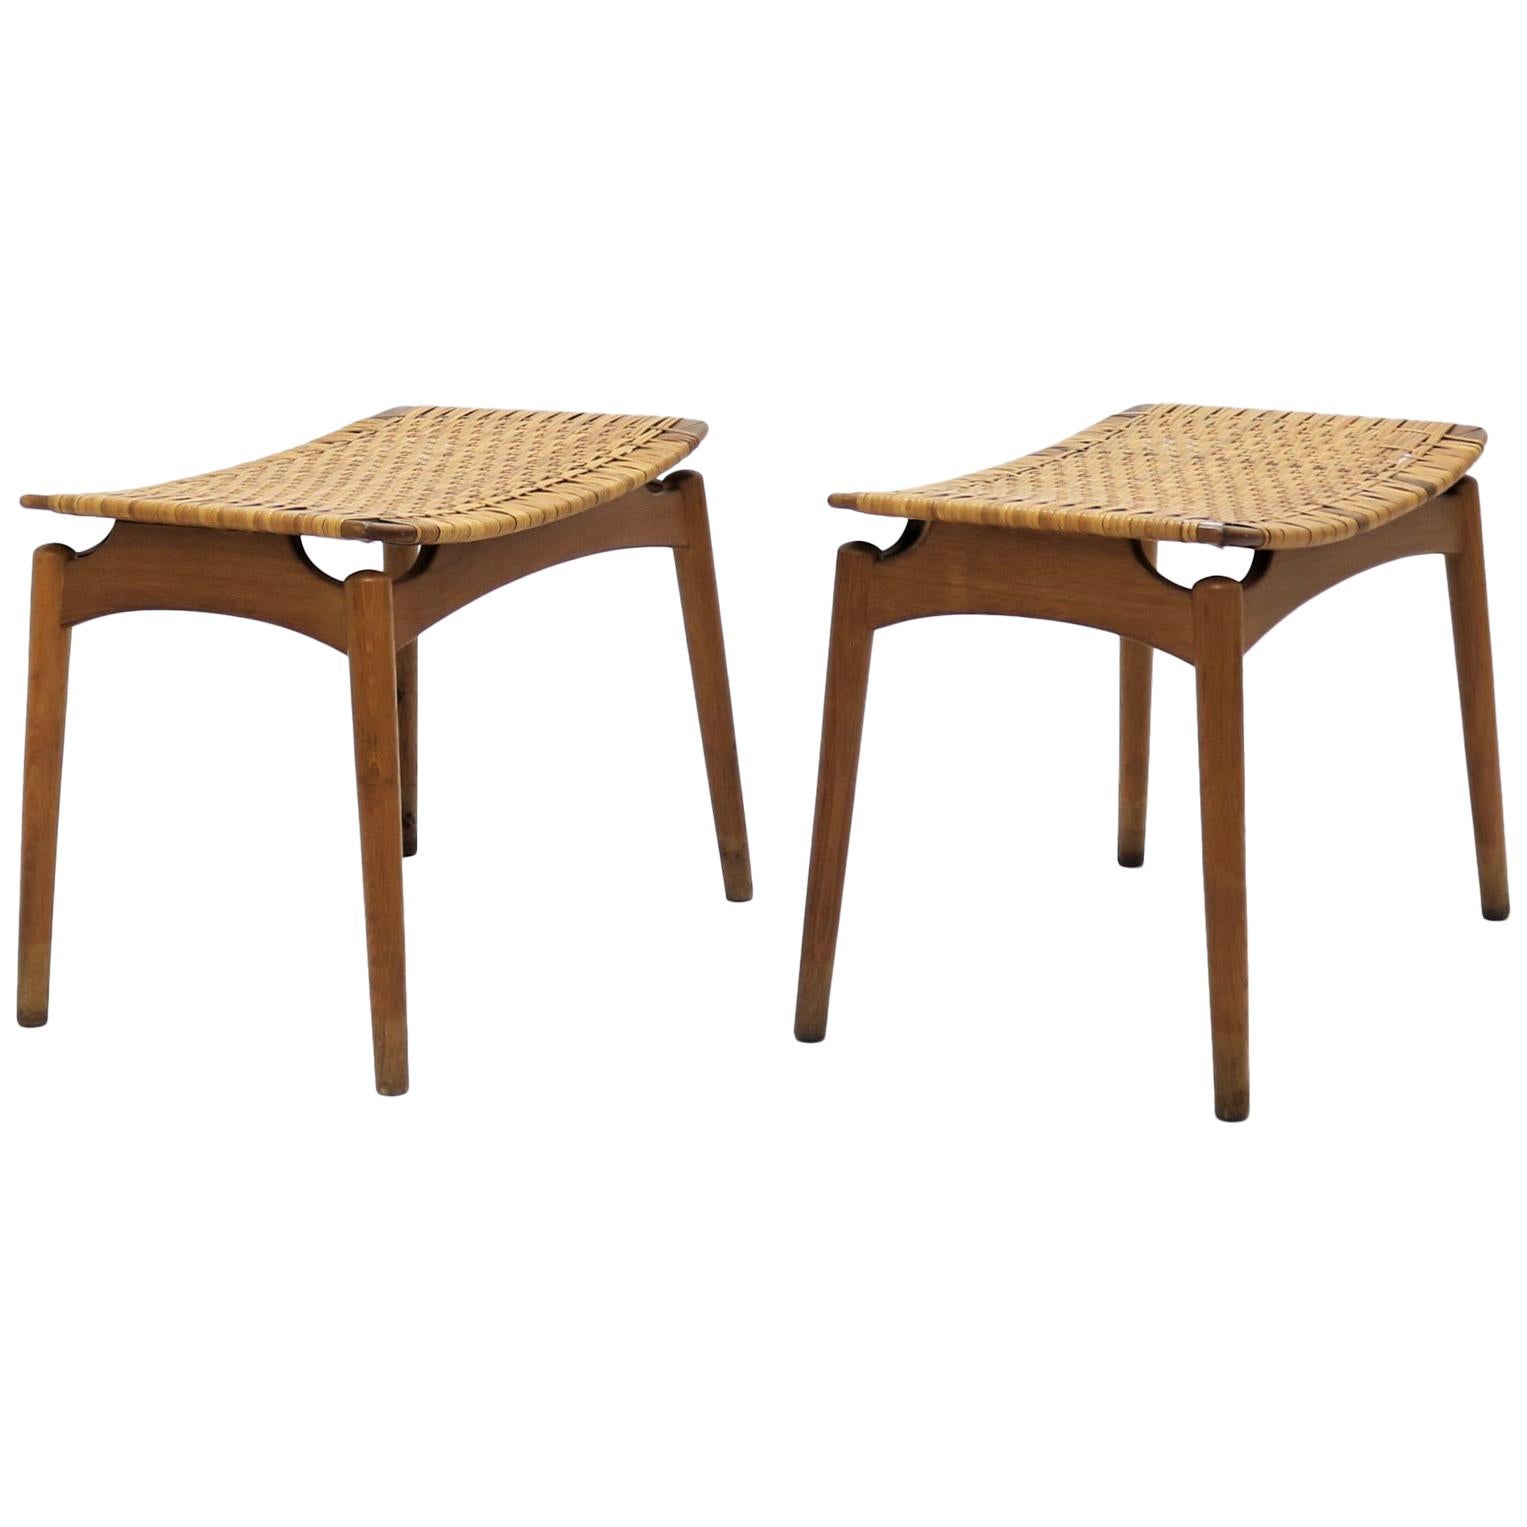 Pair of Scandinavian Modern Stools in Oak and Cane by Olholm Denmark, 1950s